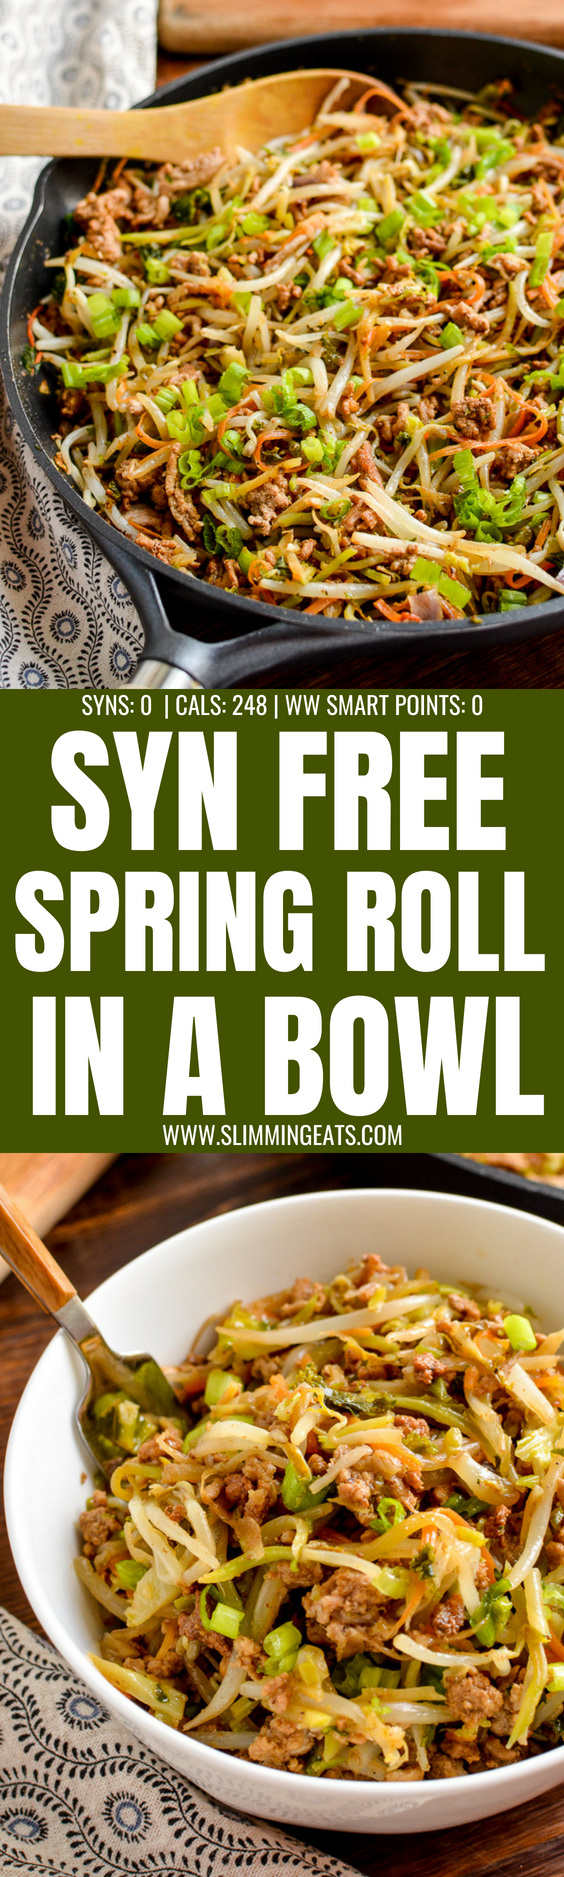 Craving some take out Chinese food but trying to be healthy? Dig into this healthy Spring Roll in a Bowl. Packed with speed foods and will satisfy your Umami cravings but not ruin your diet.| gluten free, dairy free, paleo, Slimming World and Weight Watchers friendly